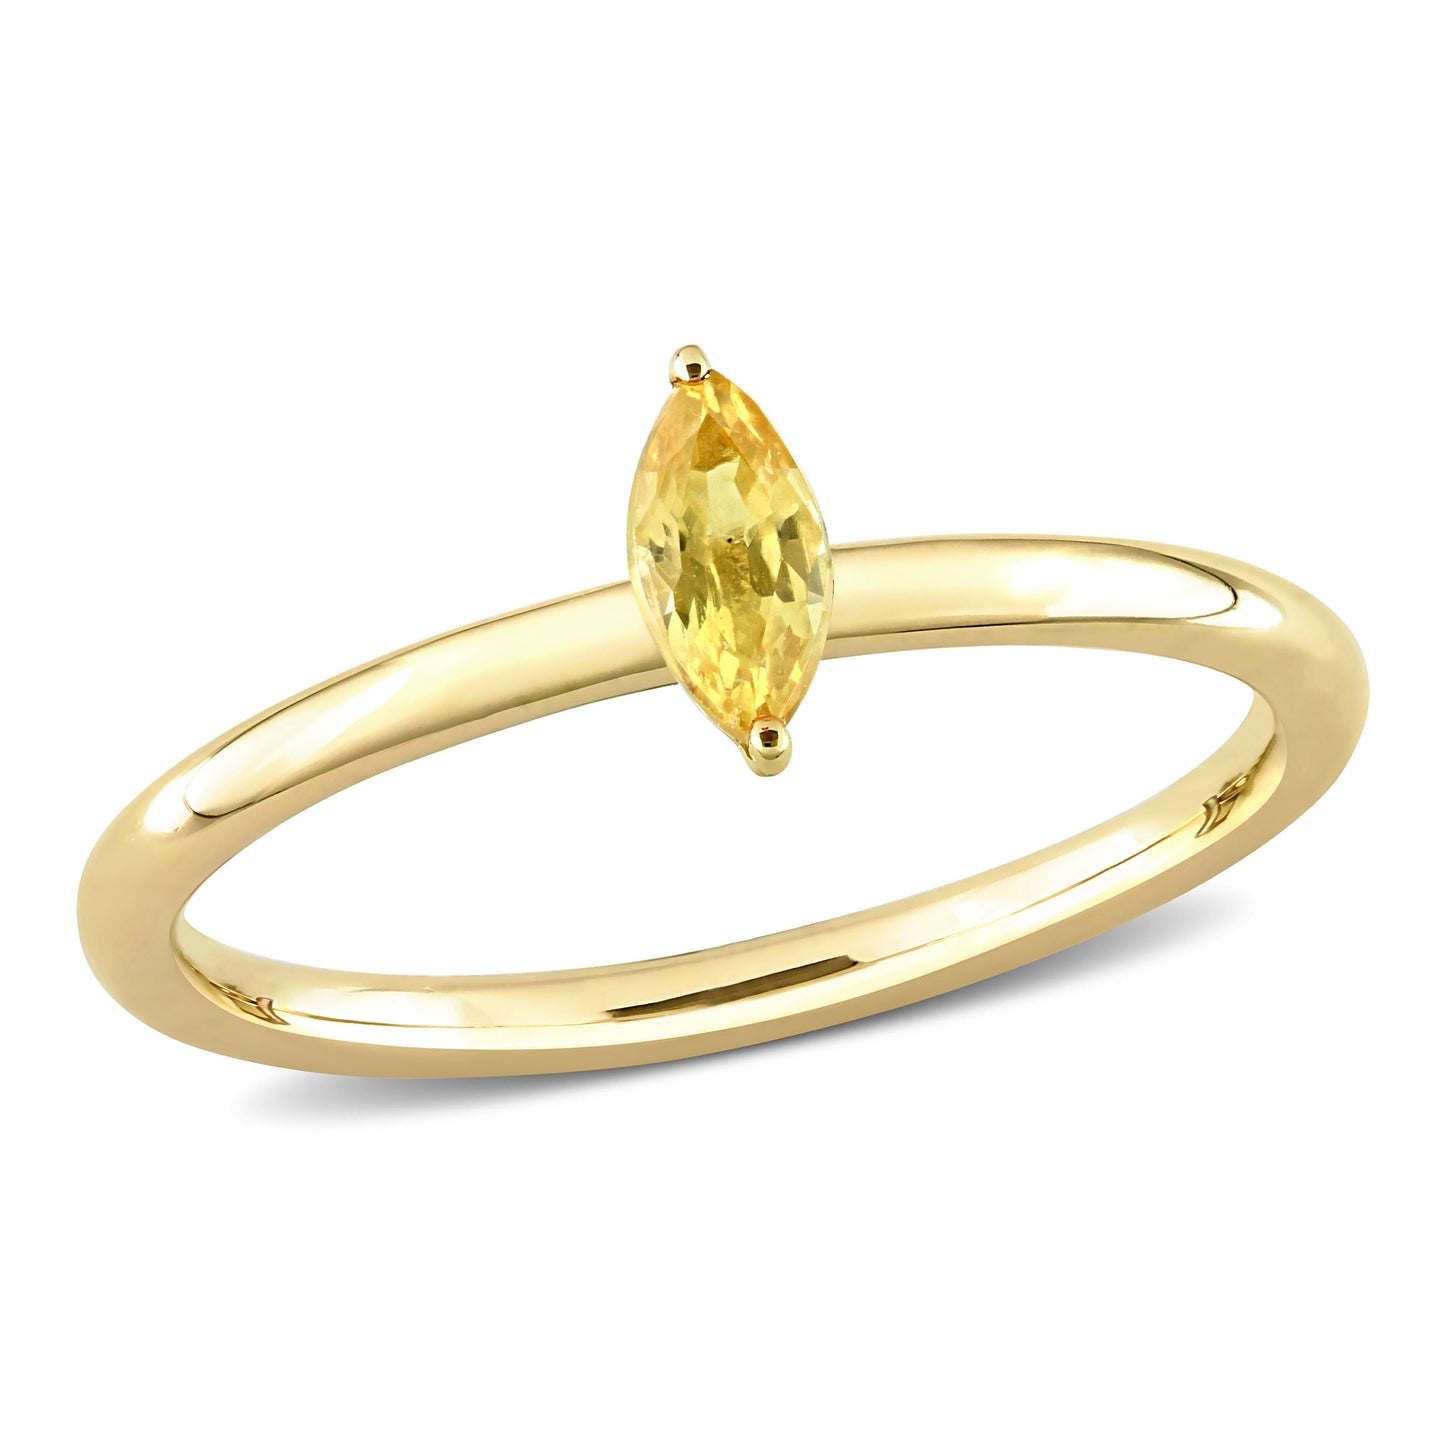 Marquise Cut Yellow Sapphire Ring in 10k Yellow Gold